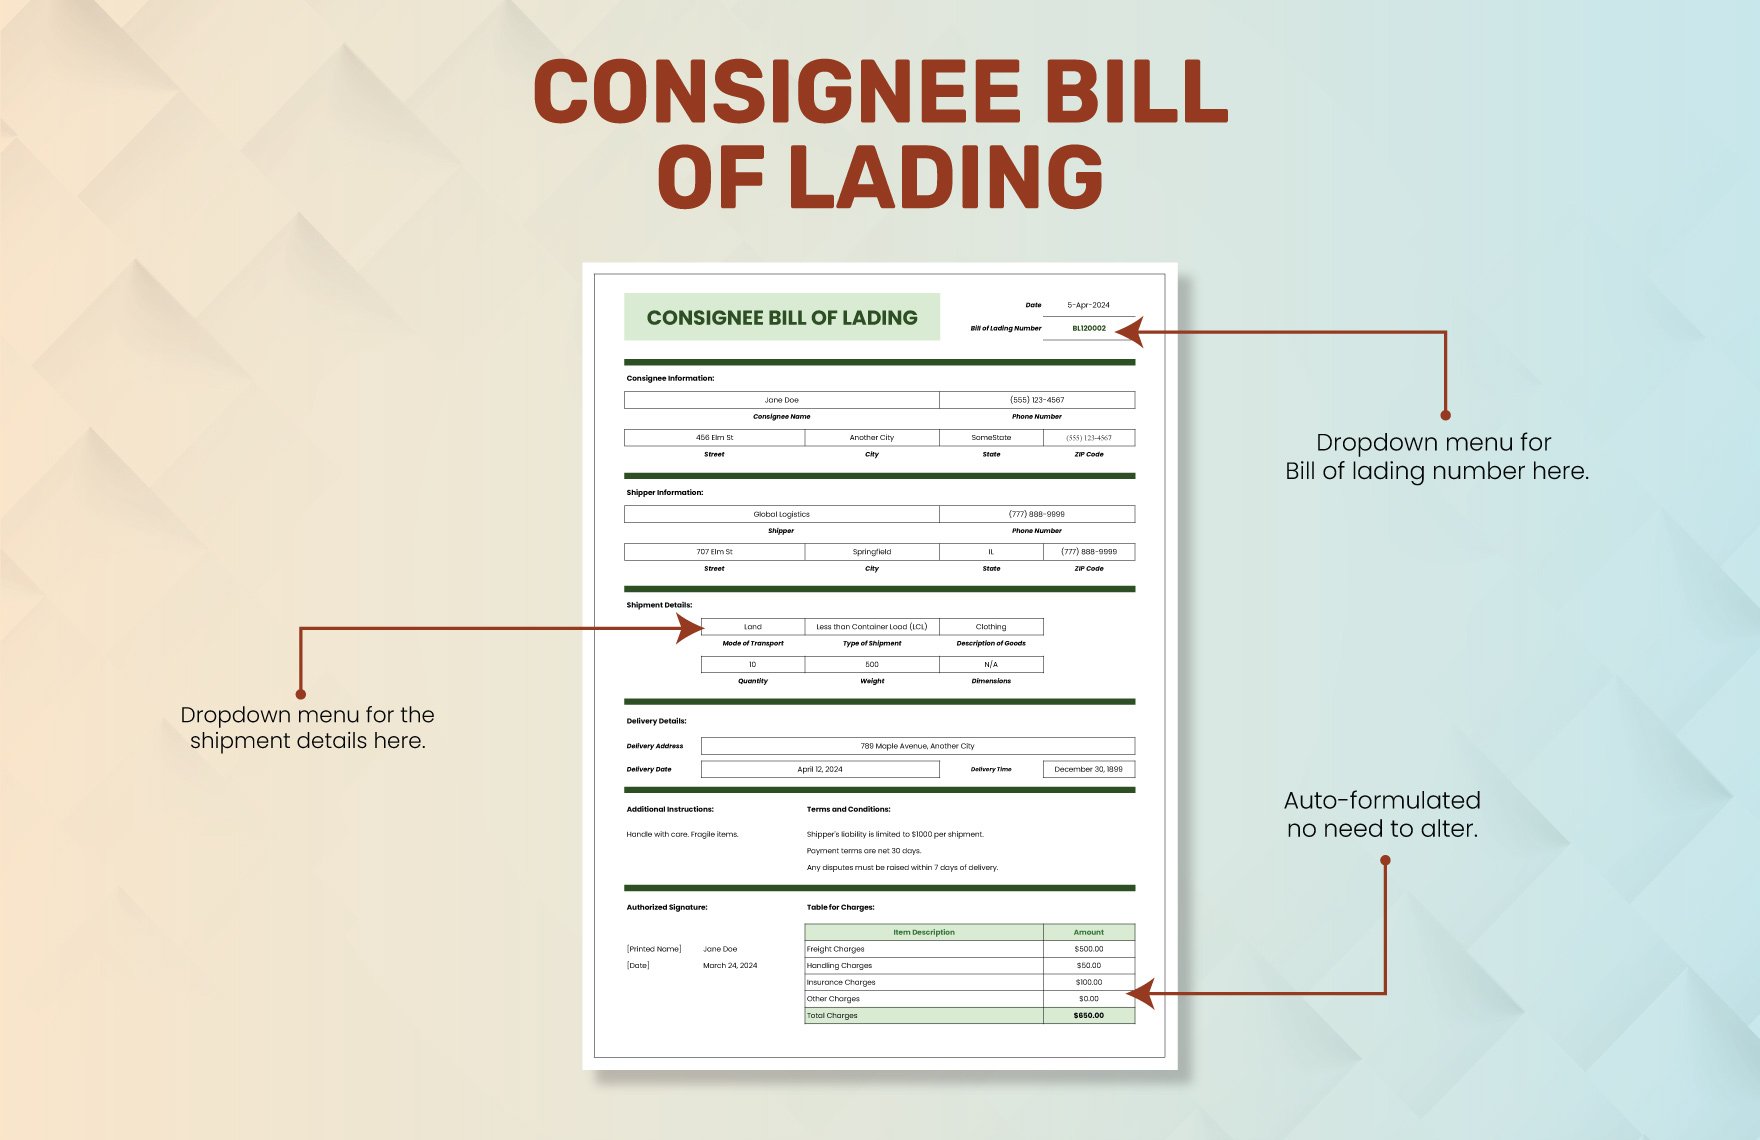 Consignee Bill of Lading Template